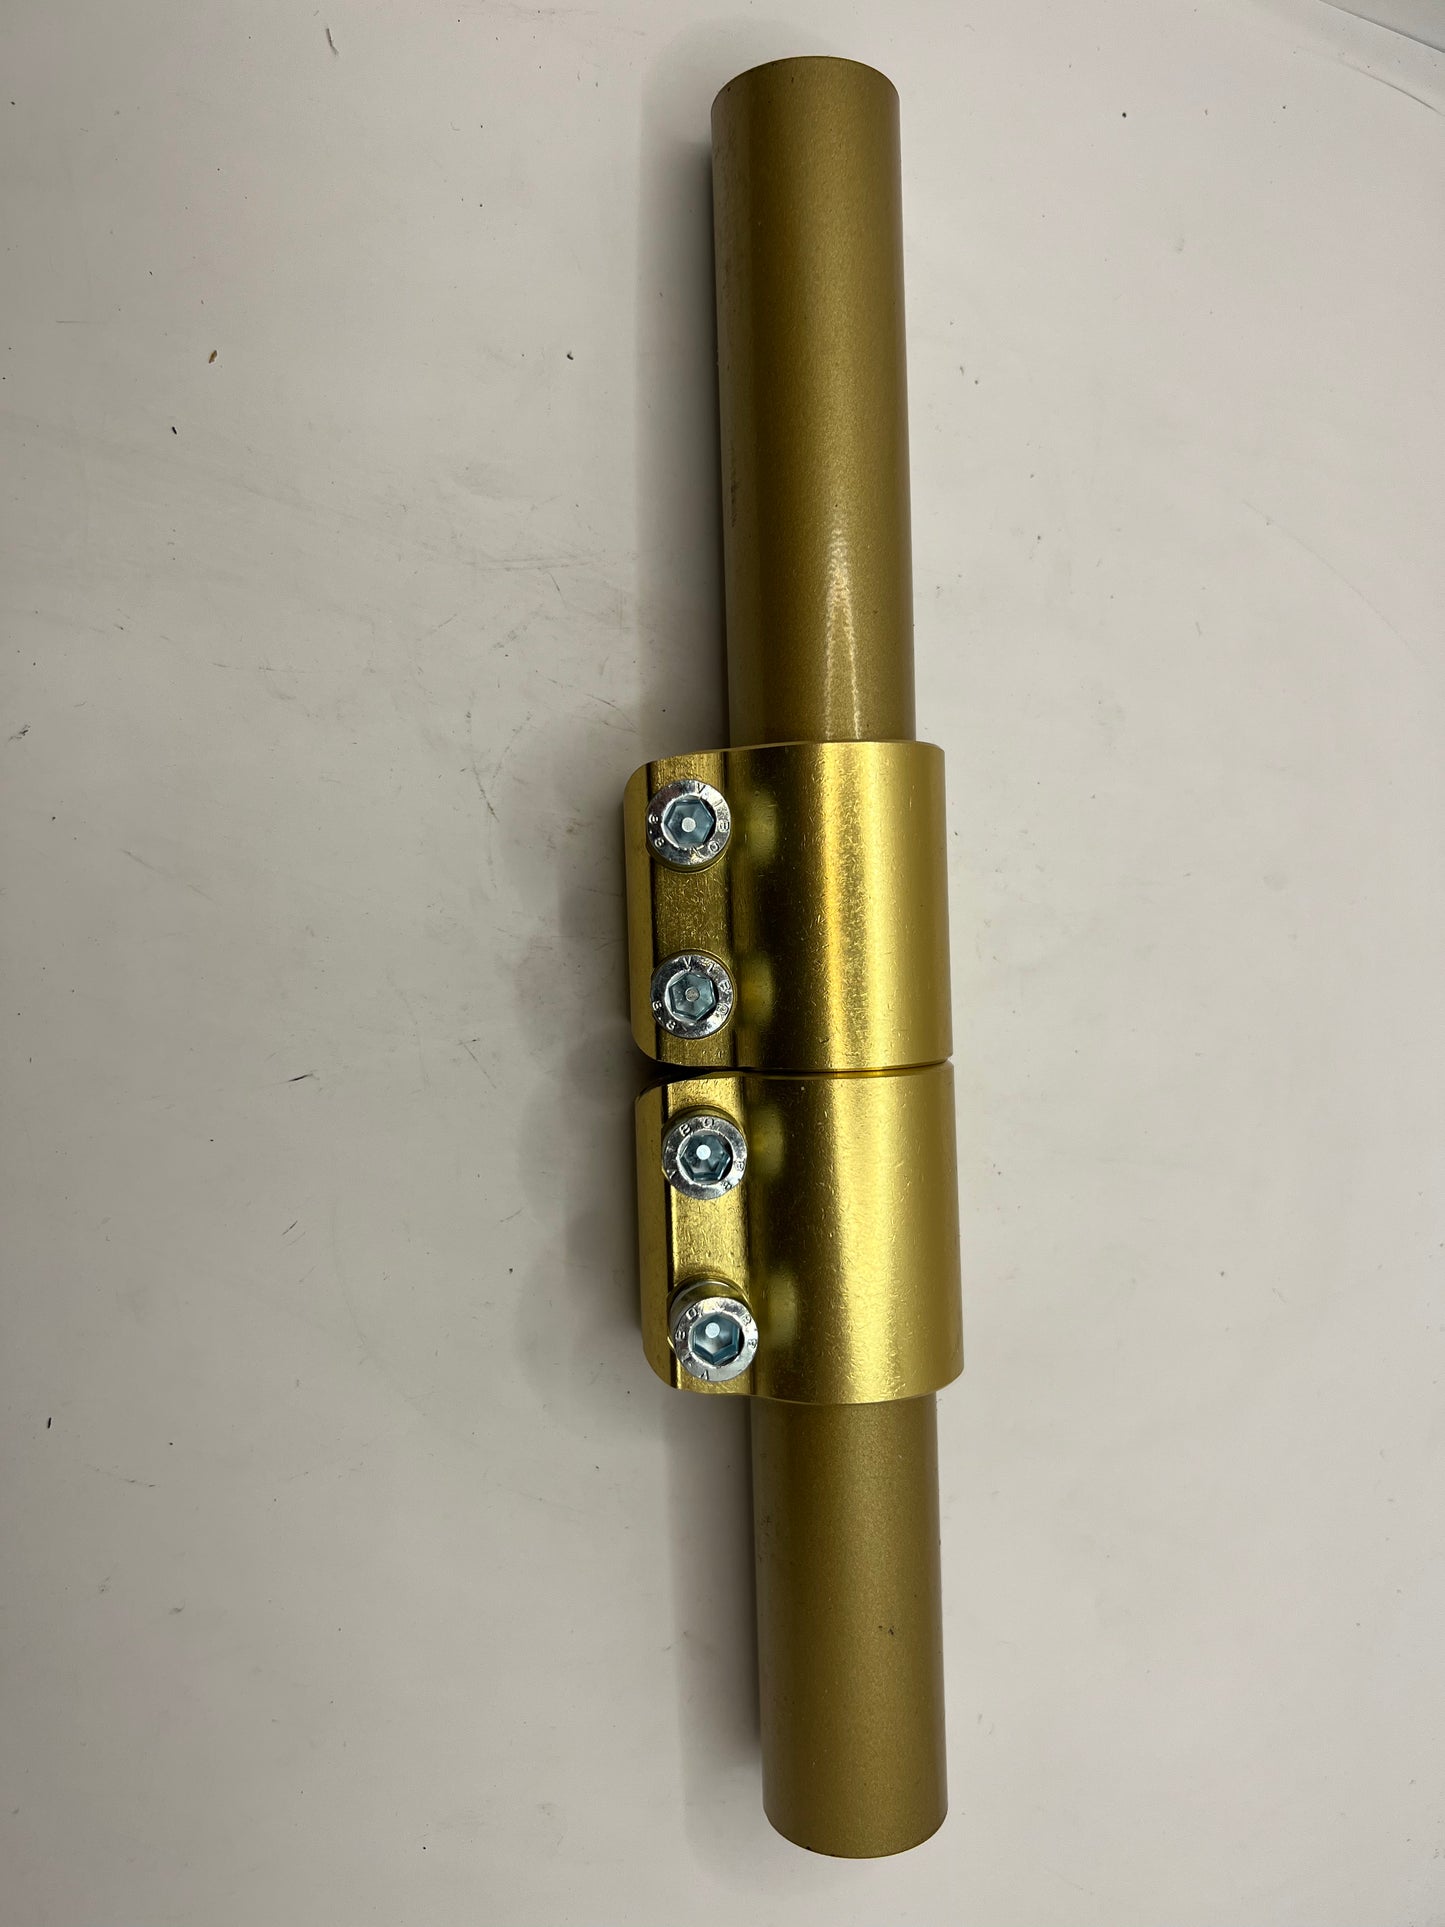 GOLD TORSION BAR WITH CLAMPS NEW